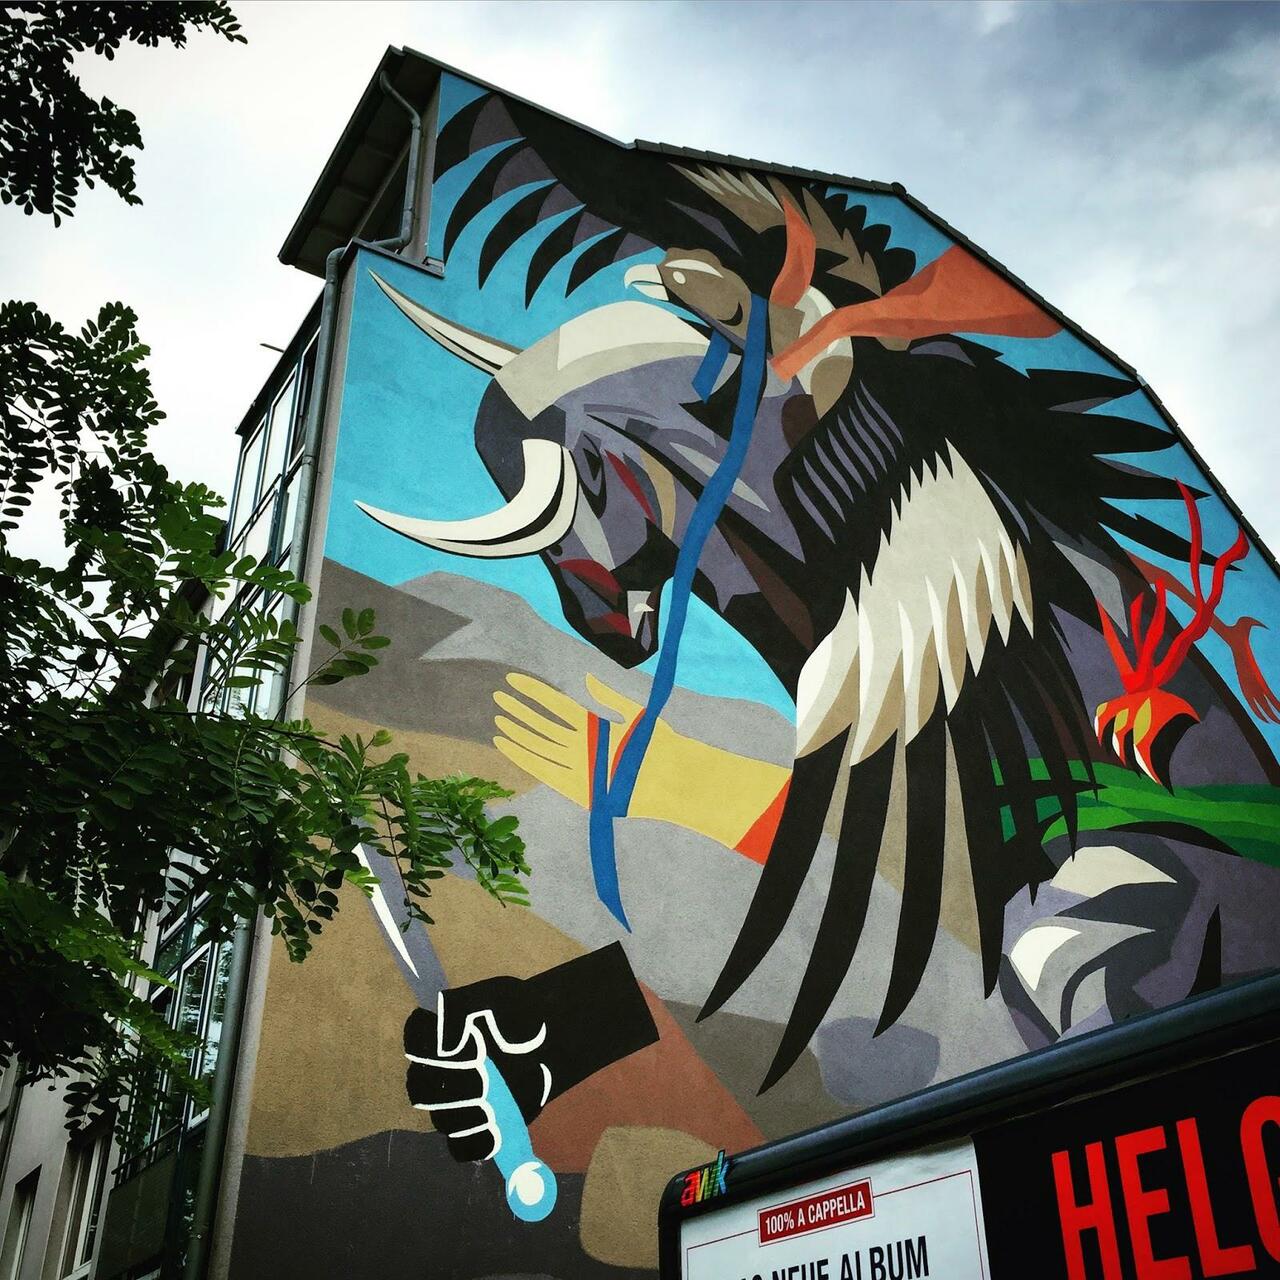 JAZ unveils a new mural in Cologne, Germany for CityLeaks '15. #StreetArt #Graffiti #Mural http://t.co/a38bkxl96h